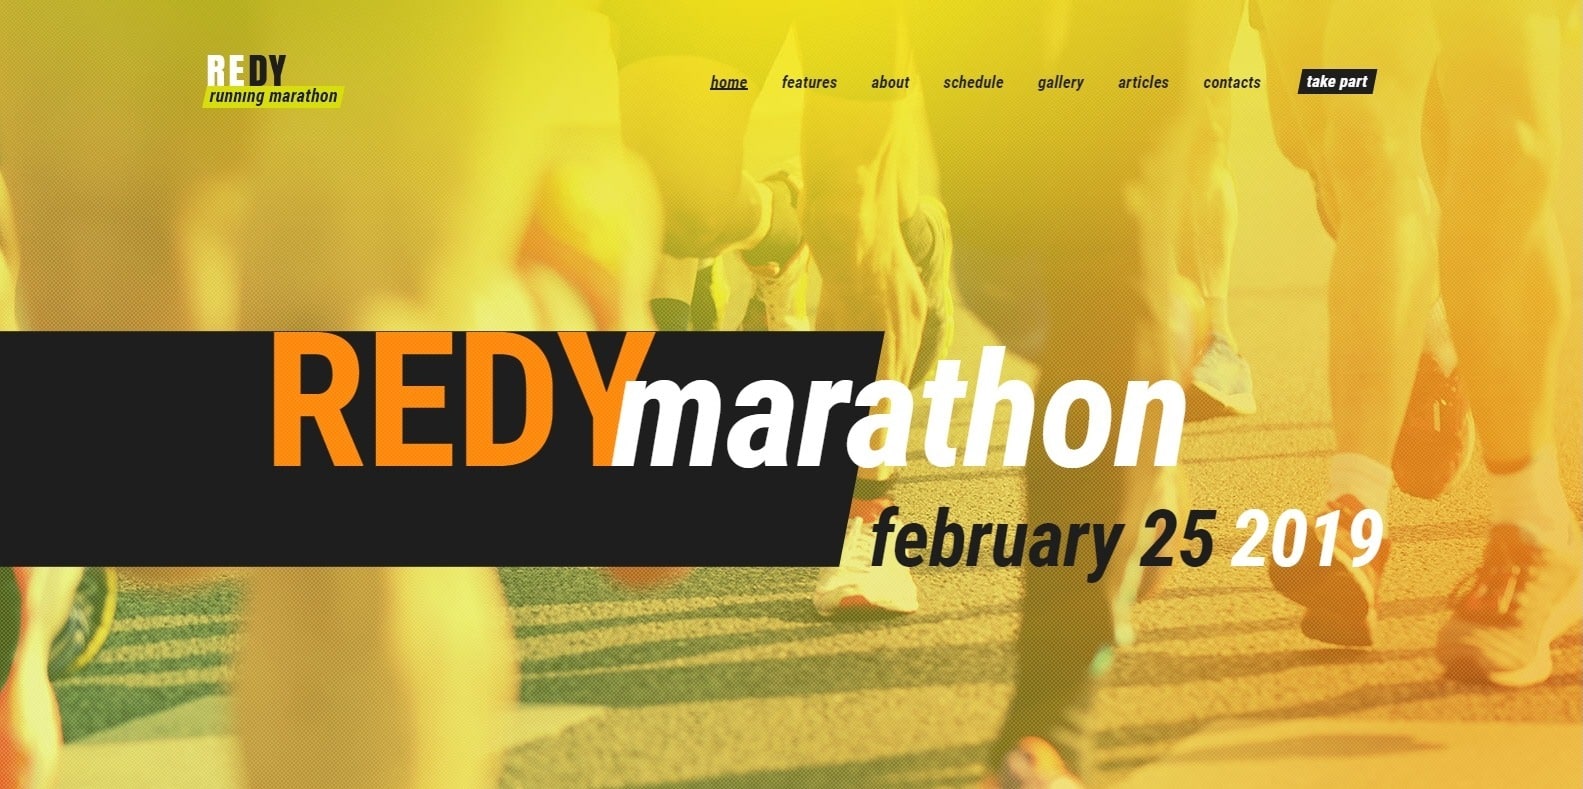 redy-sports-website-template